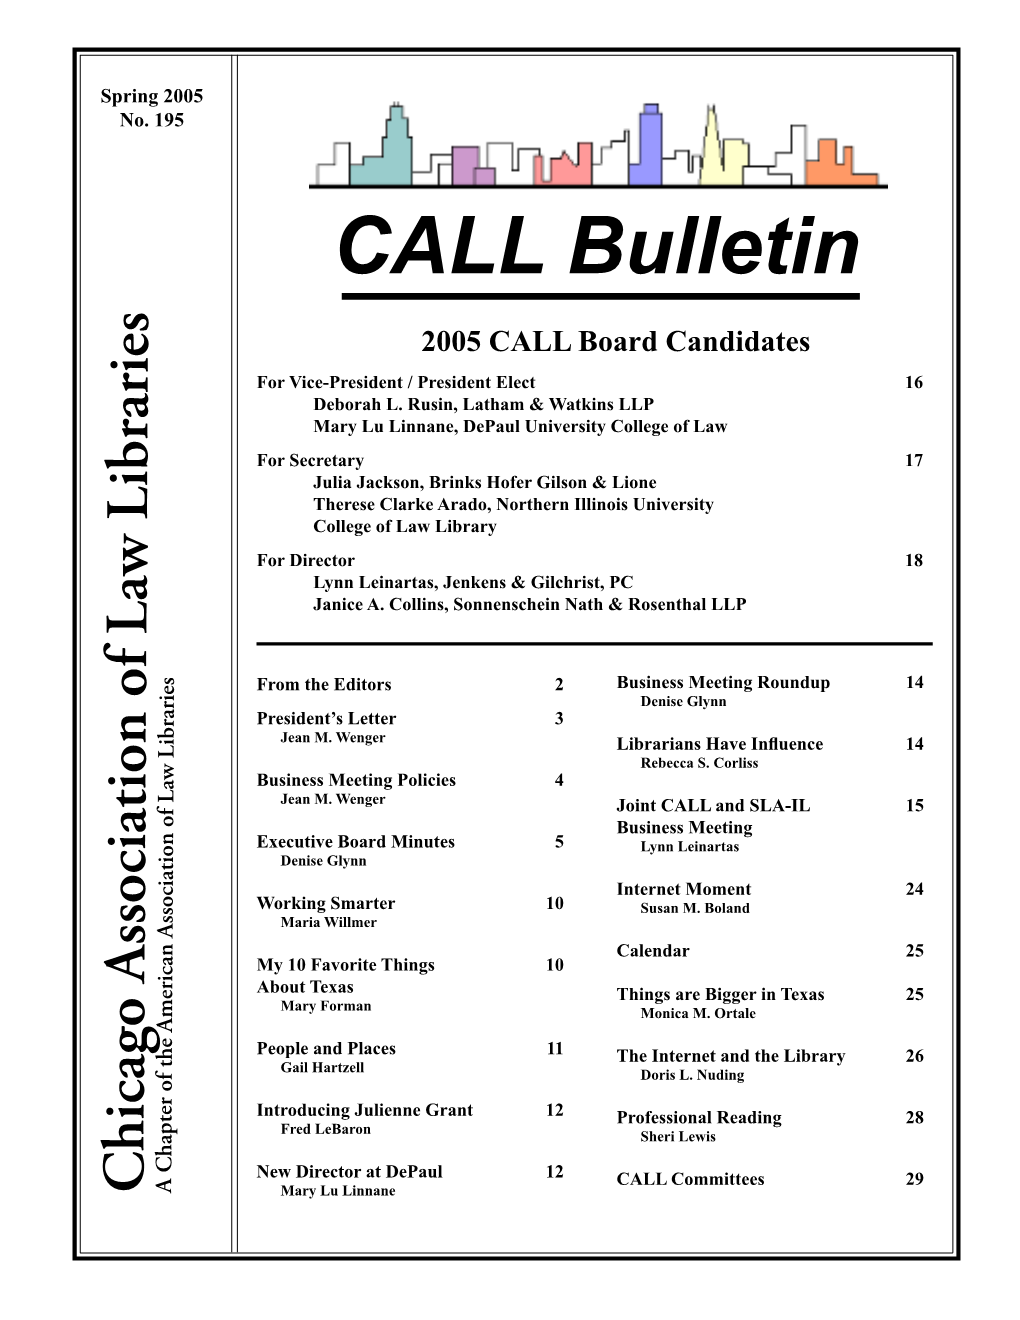 CALL Bulletin 2005 CALL Board Candidates for Vice-President / President Elect 16 Deborah L